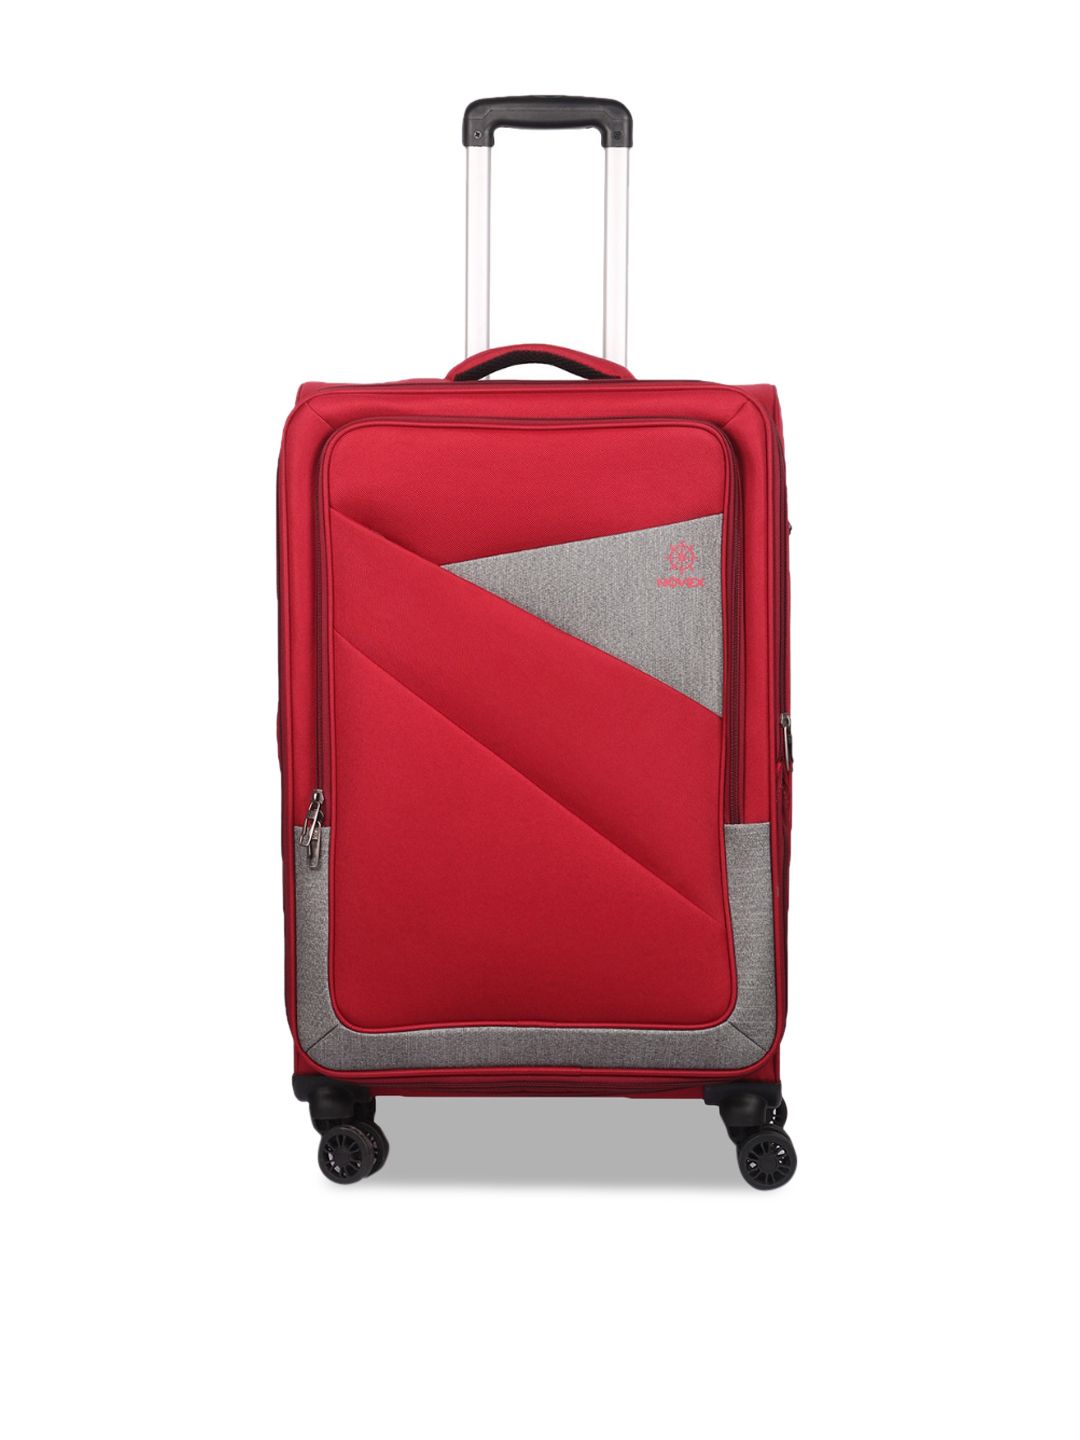 NOVEX Red & Grey Solid Soft-Sided Medium Trolley Suitcase Price in India